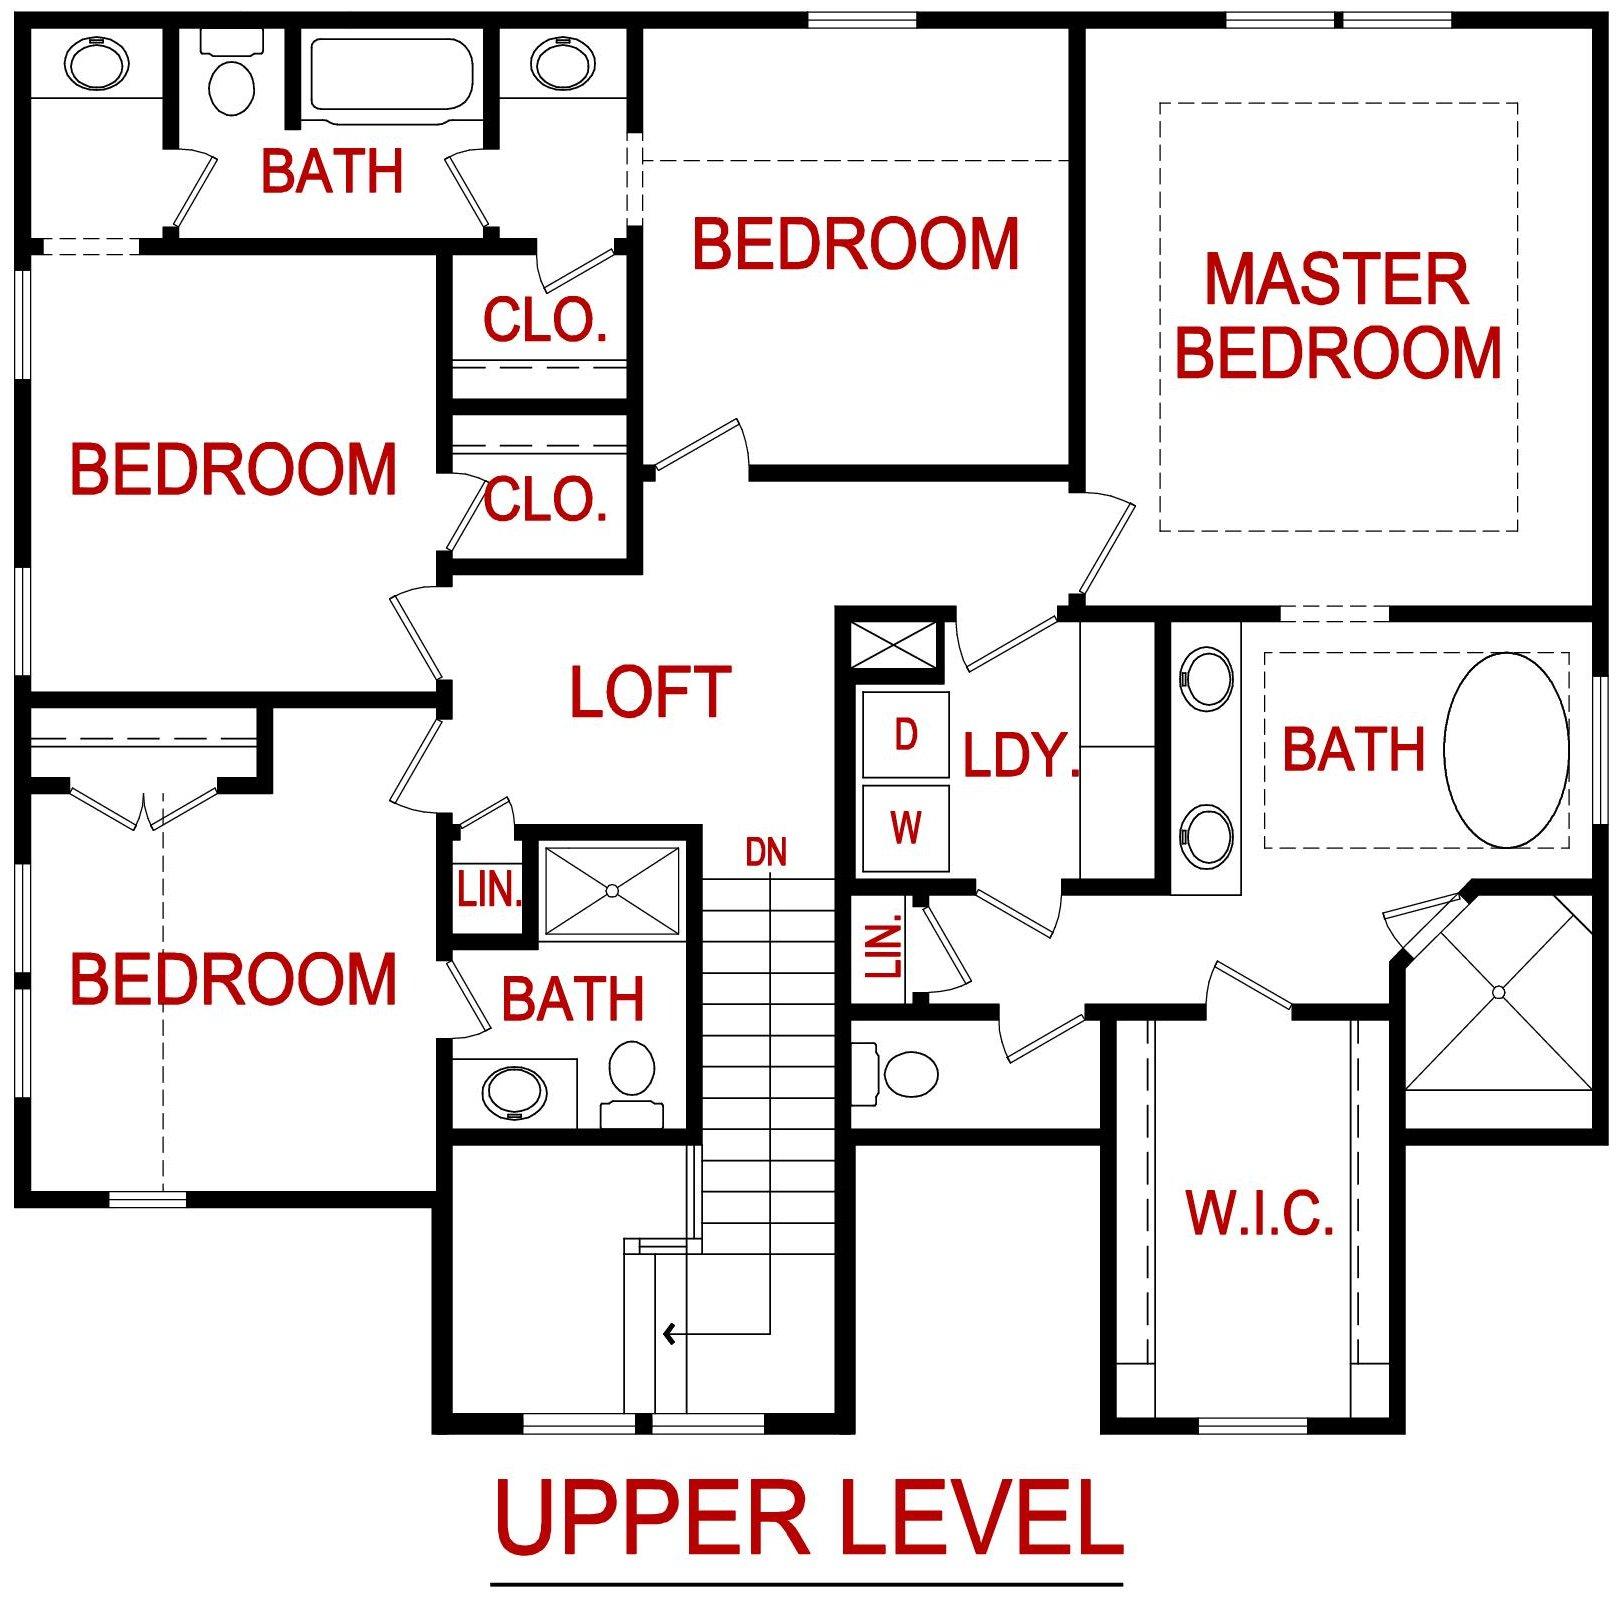 Upper level floor plan of the sequoia model from lambie homes